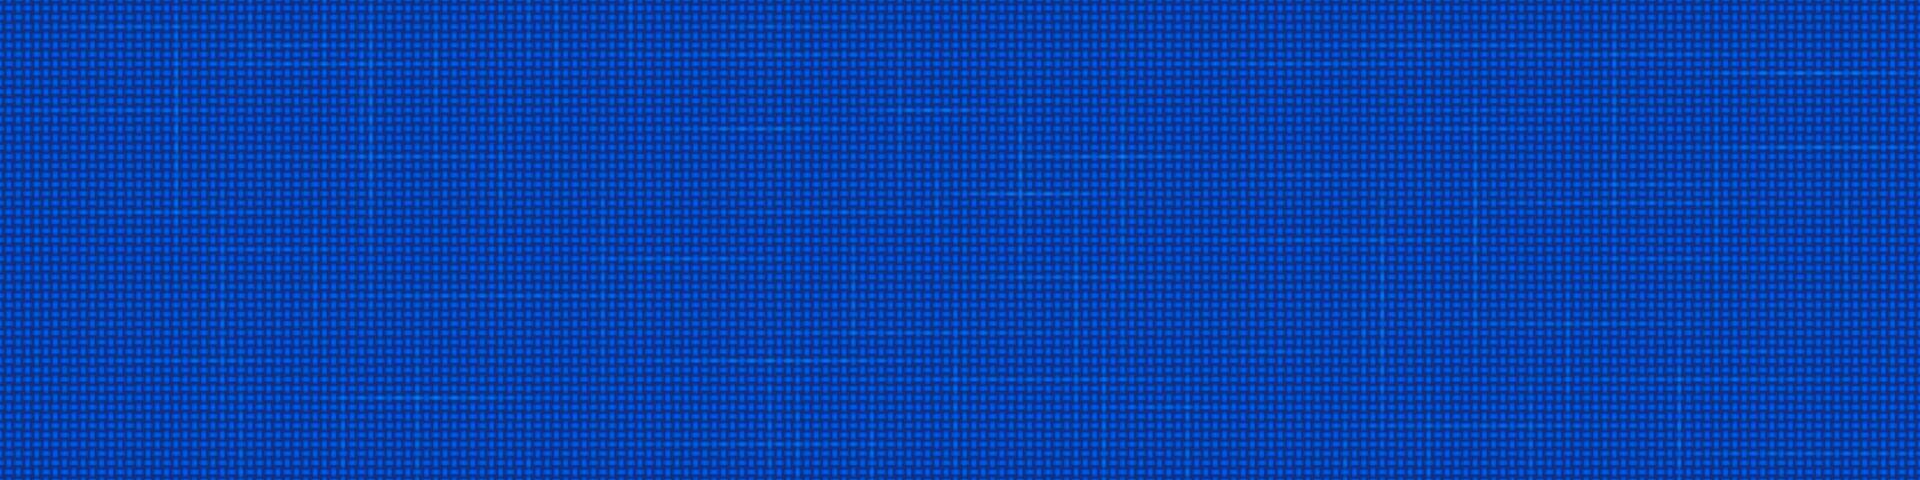 Blue woven fabric pattern vector